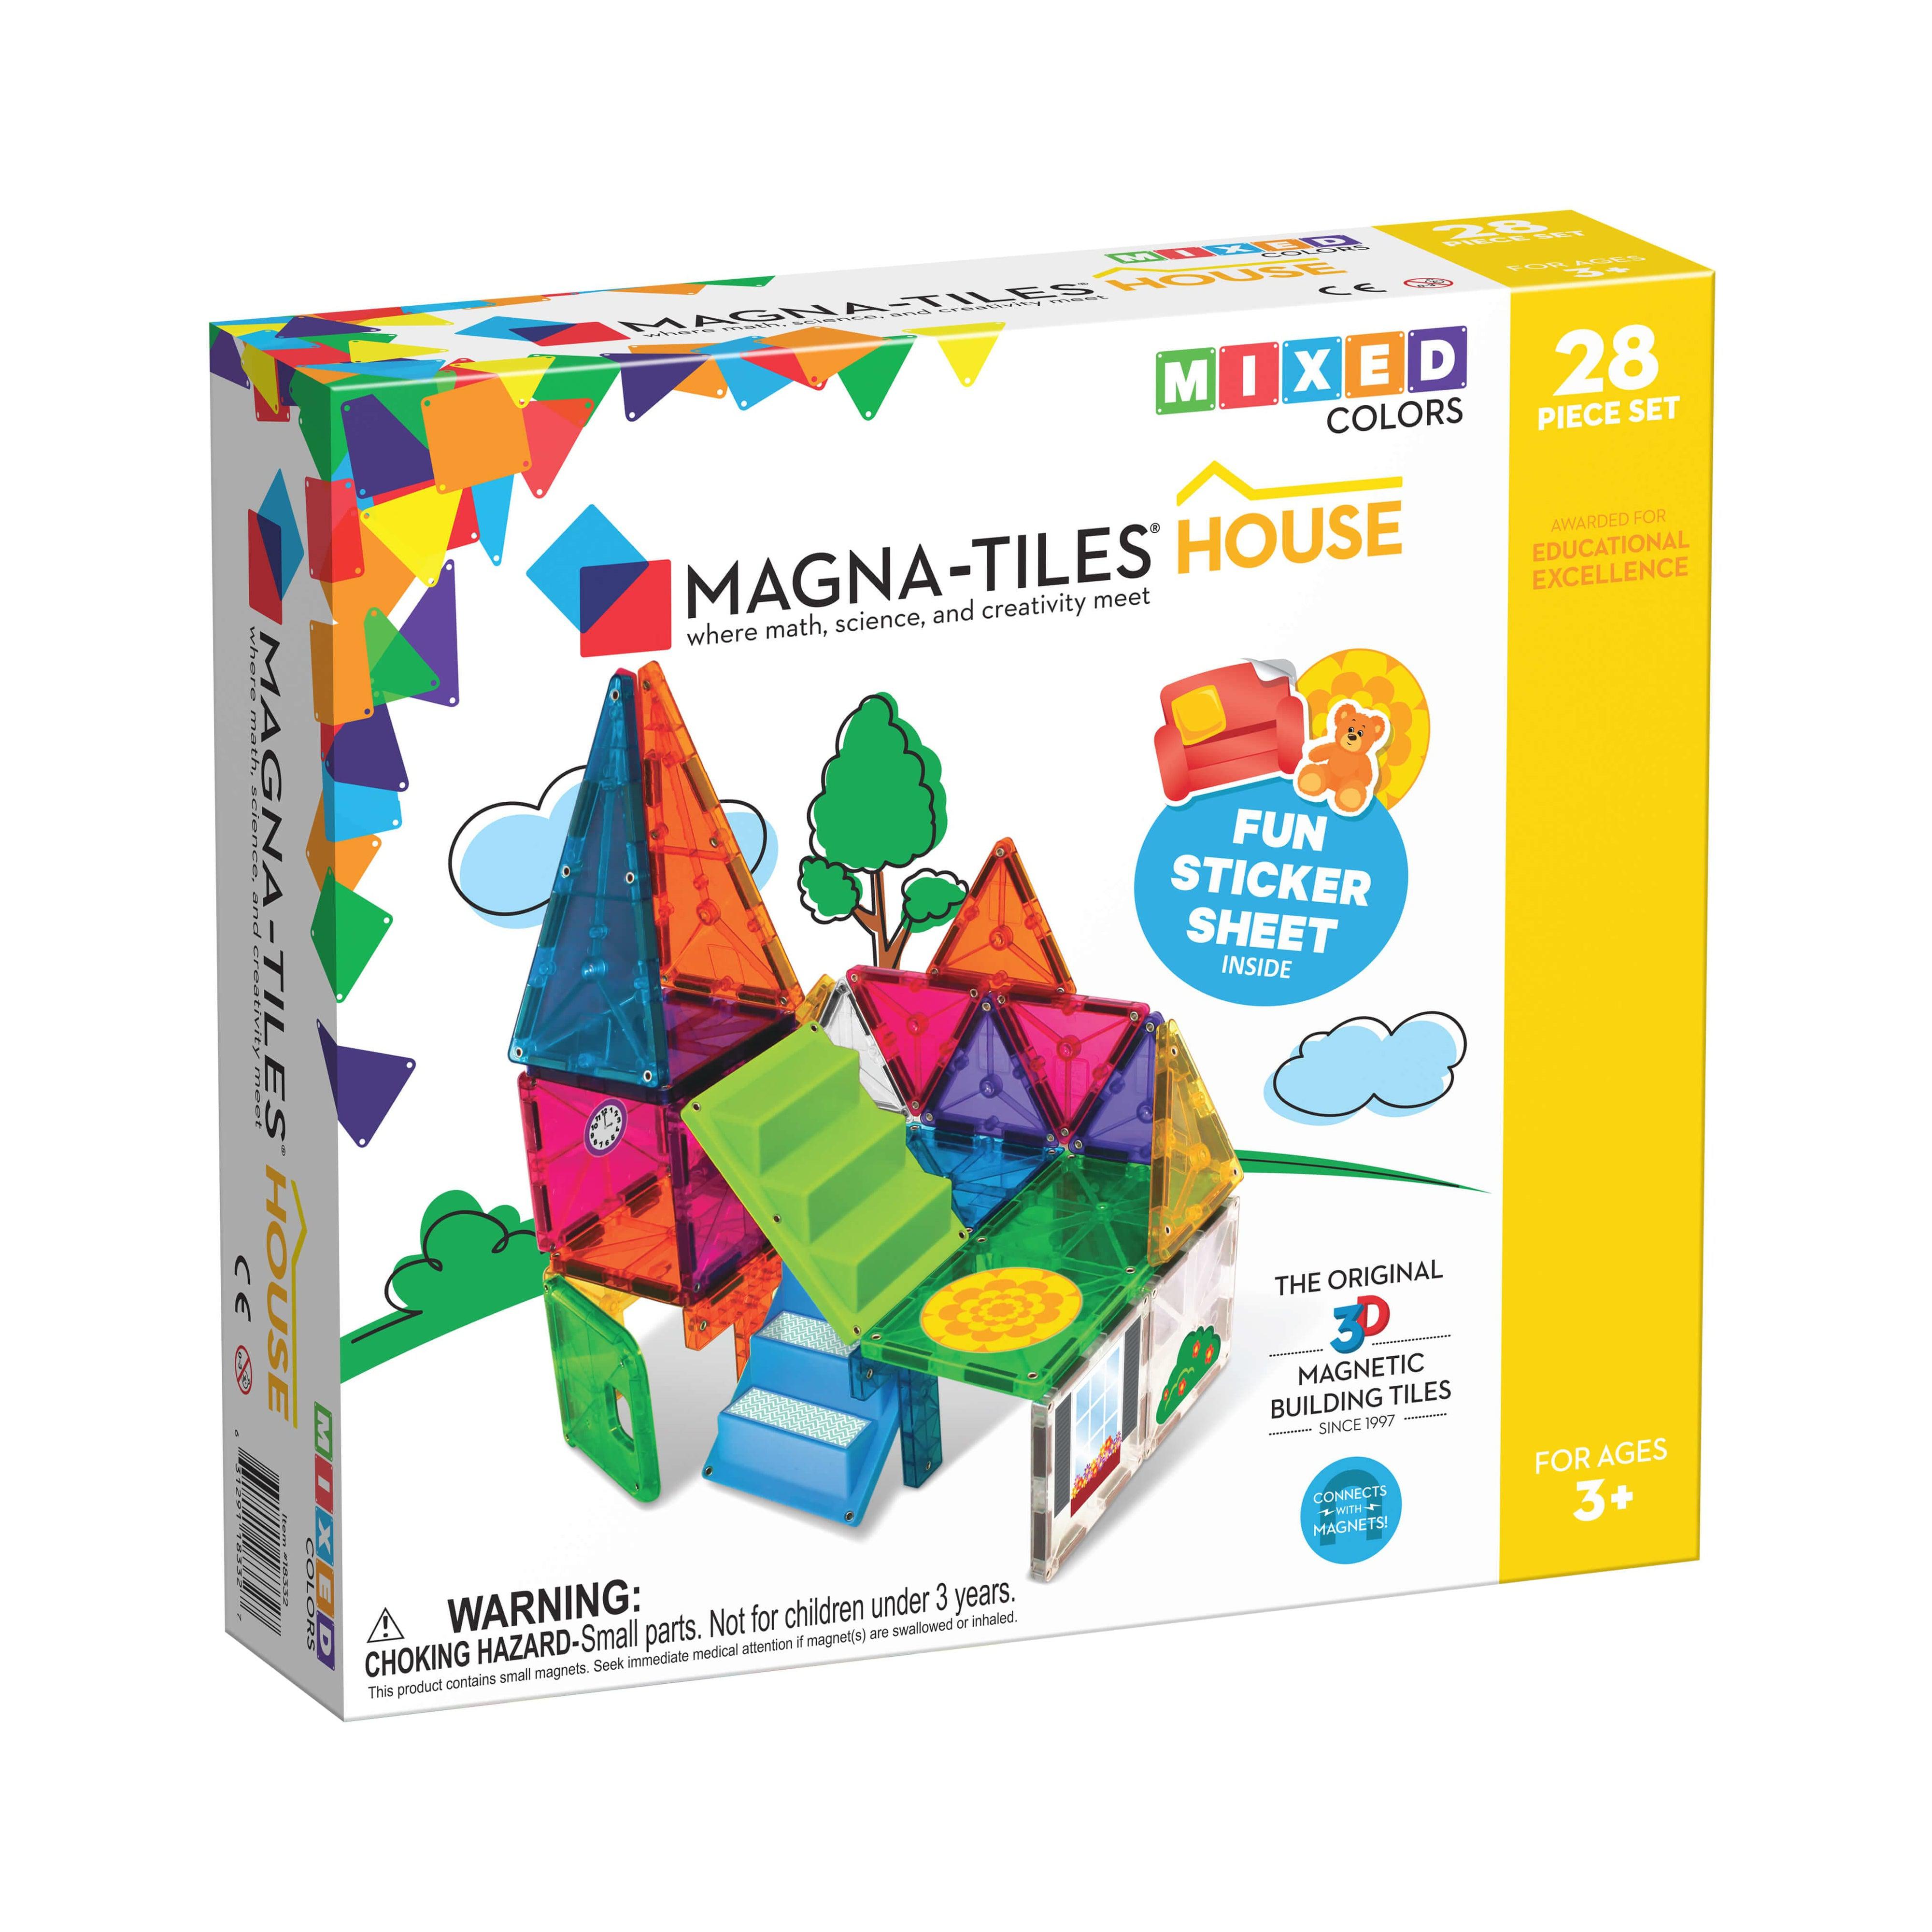 Magnetic Shapes House and Rocket - Imagination Magnets Educational Toys -  Fun Shapes and Colors 